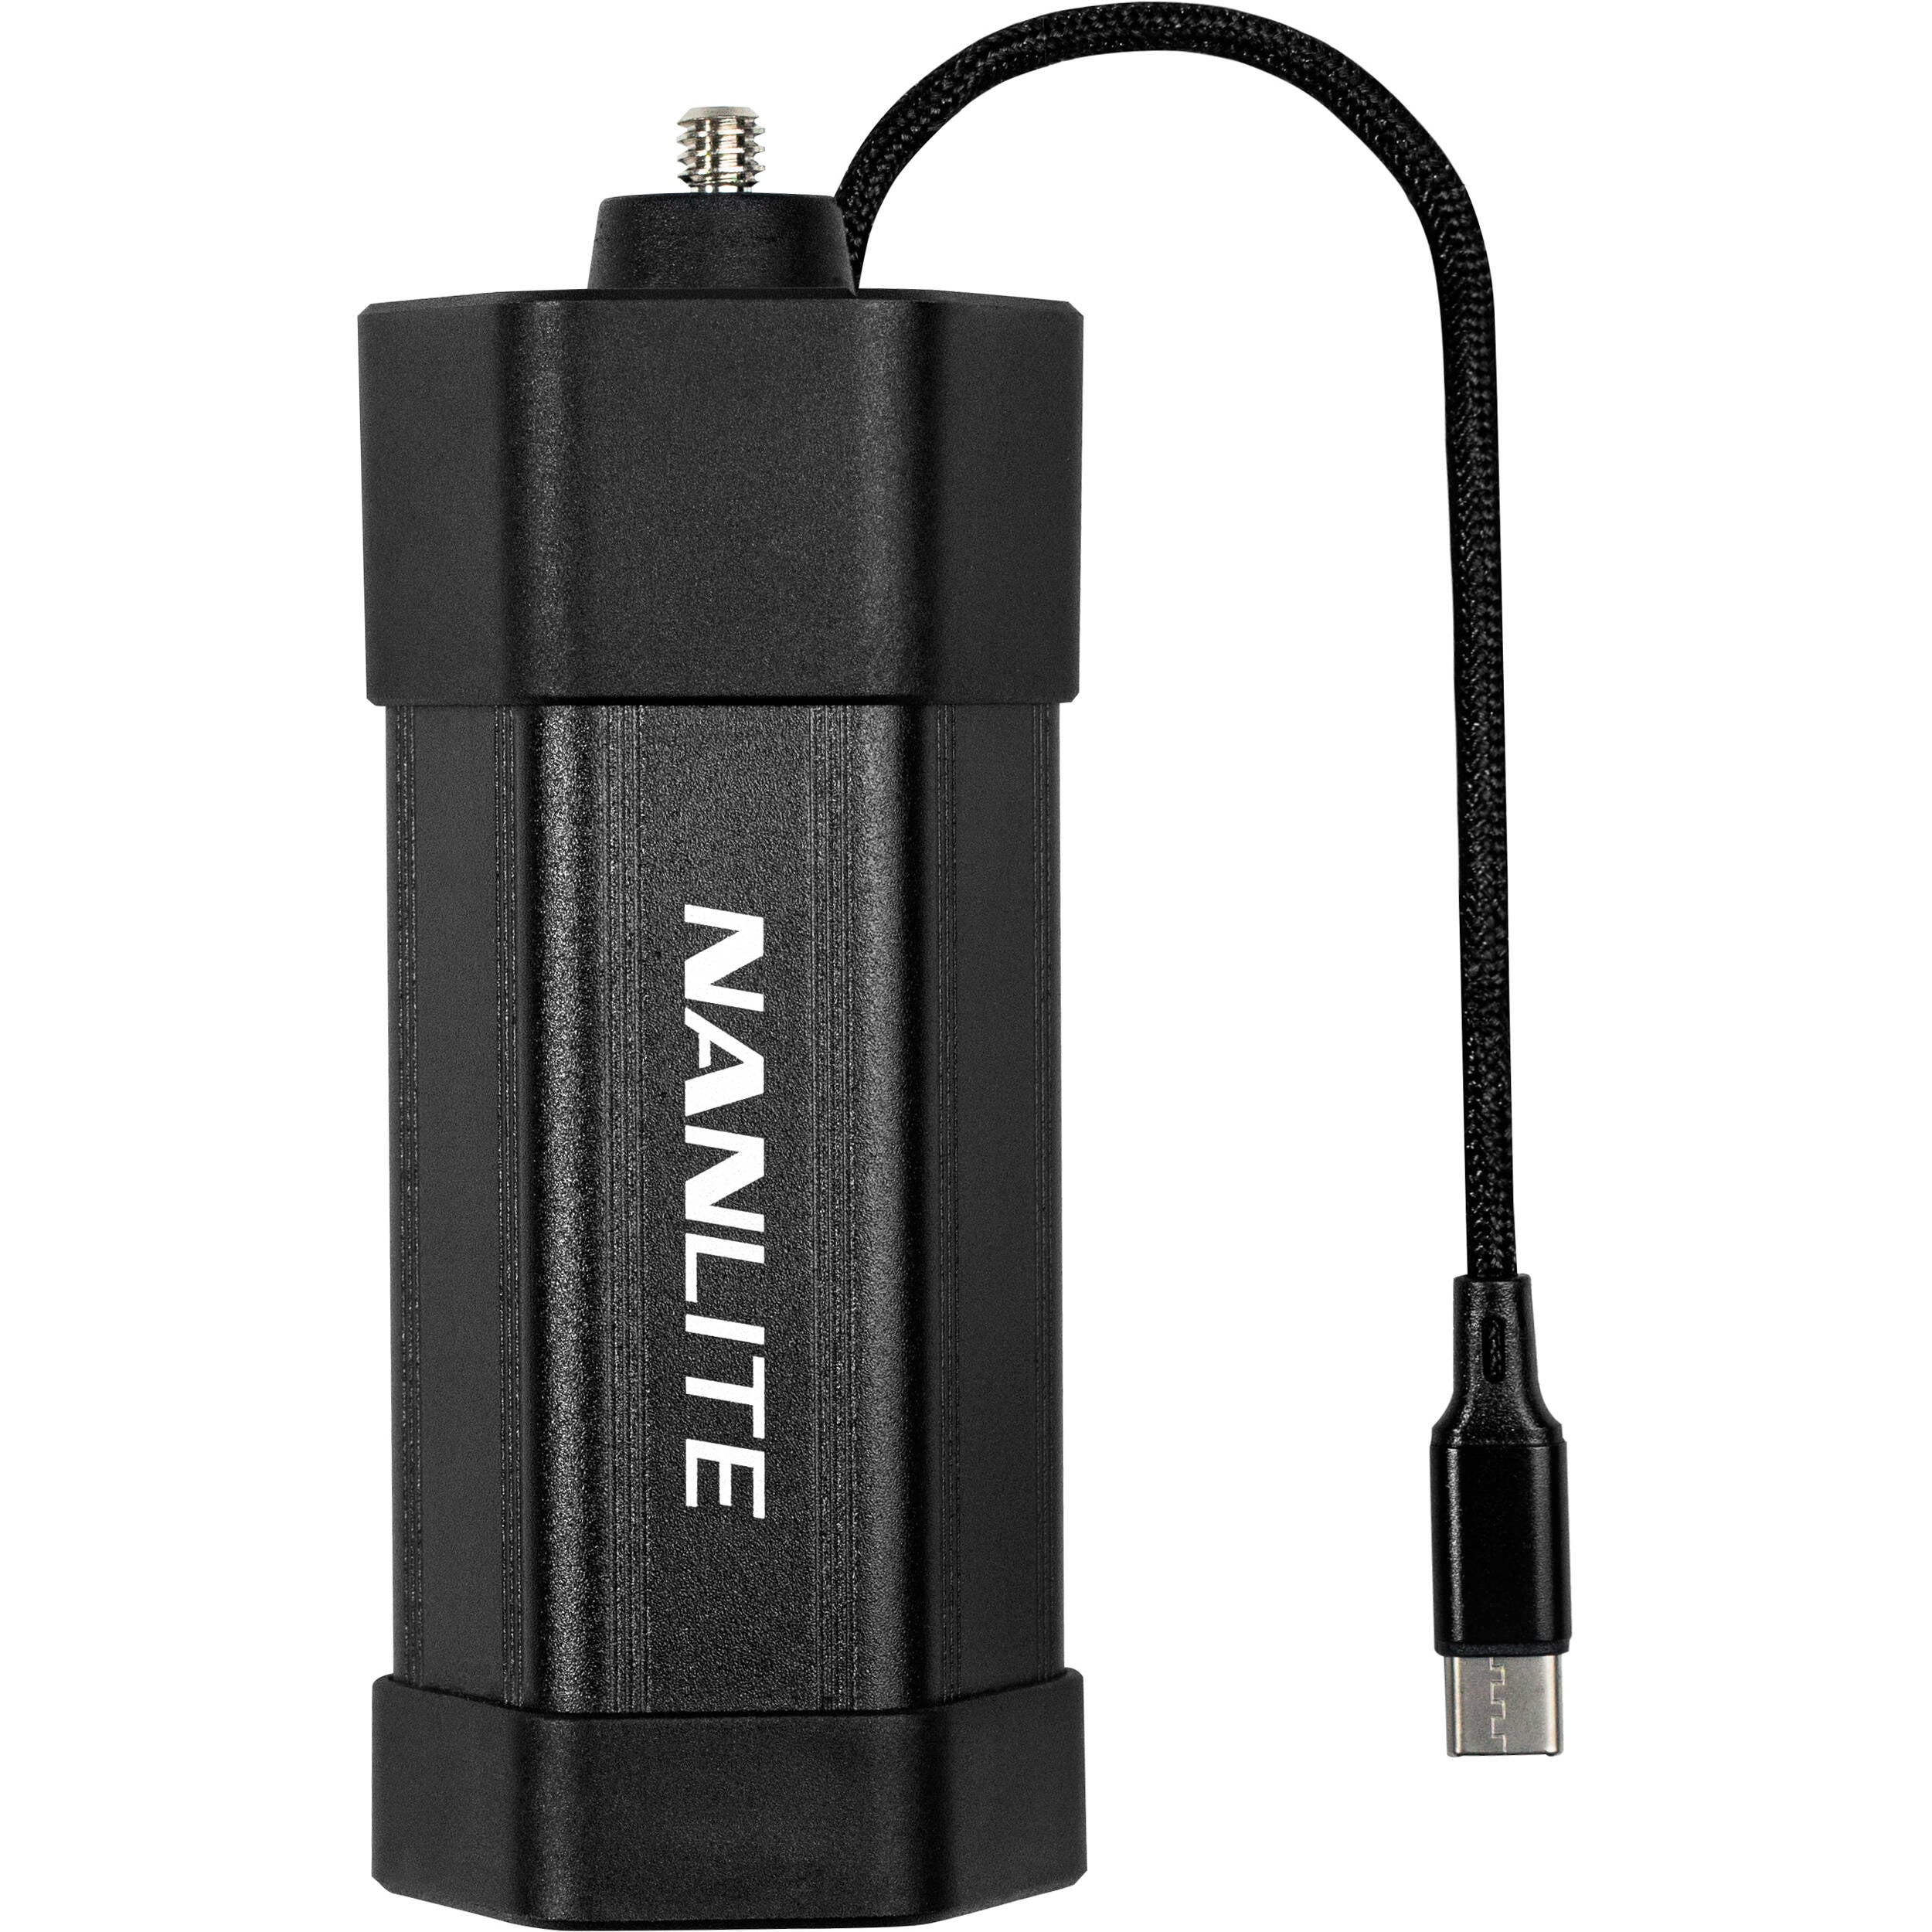 Nanlite PavoTube II 6C NP-F Battery Grip with USB-C Cable